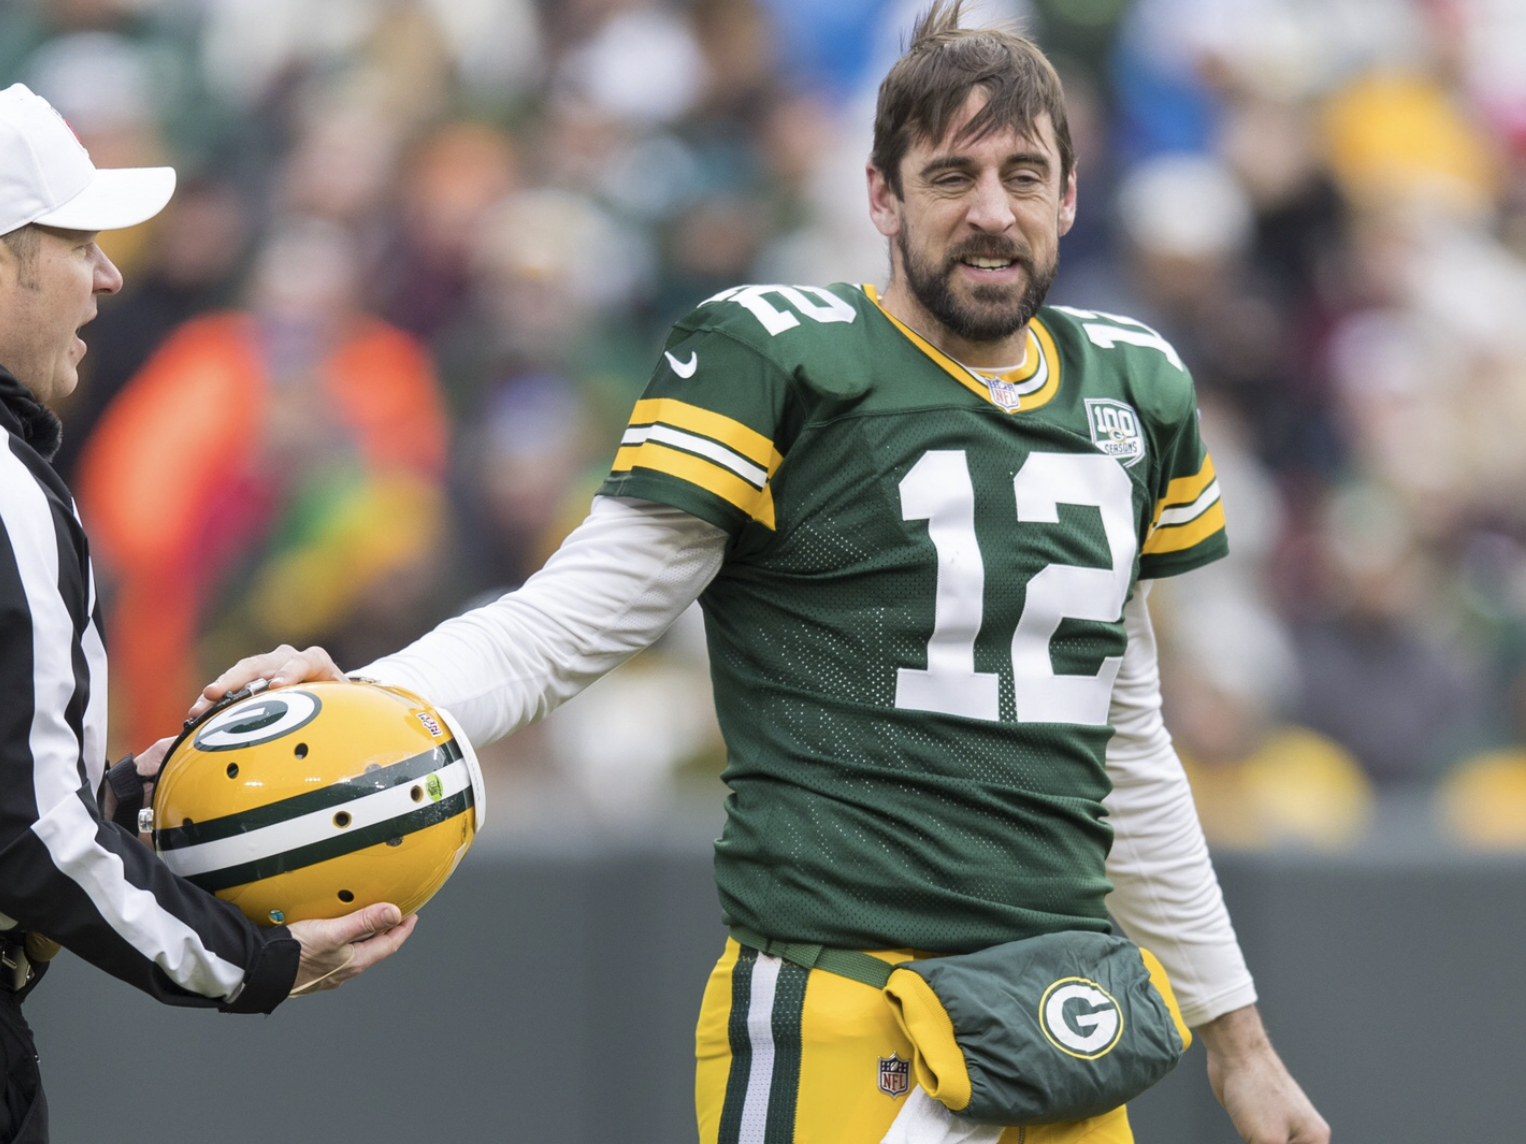 aaron rodgers jersey canada